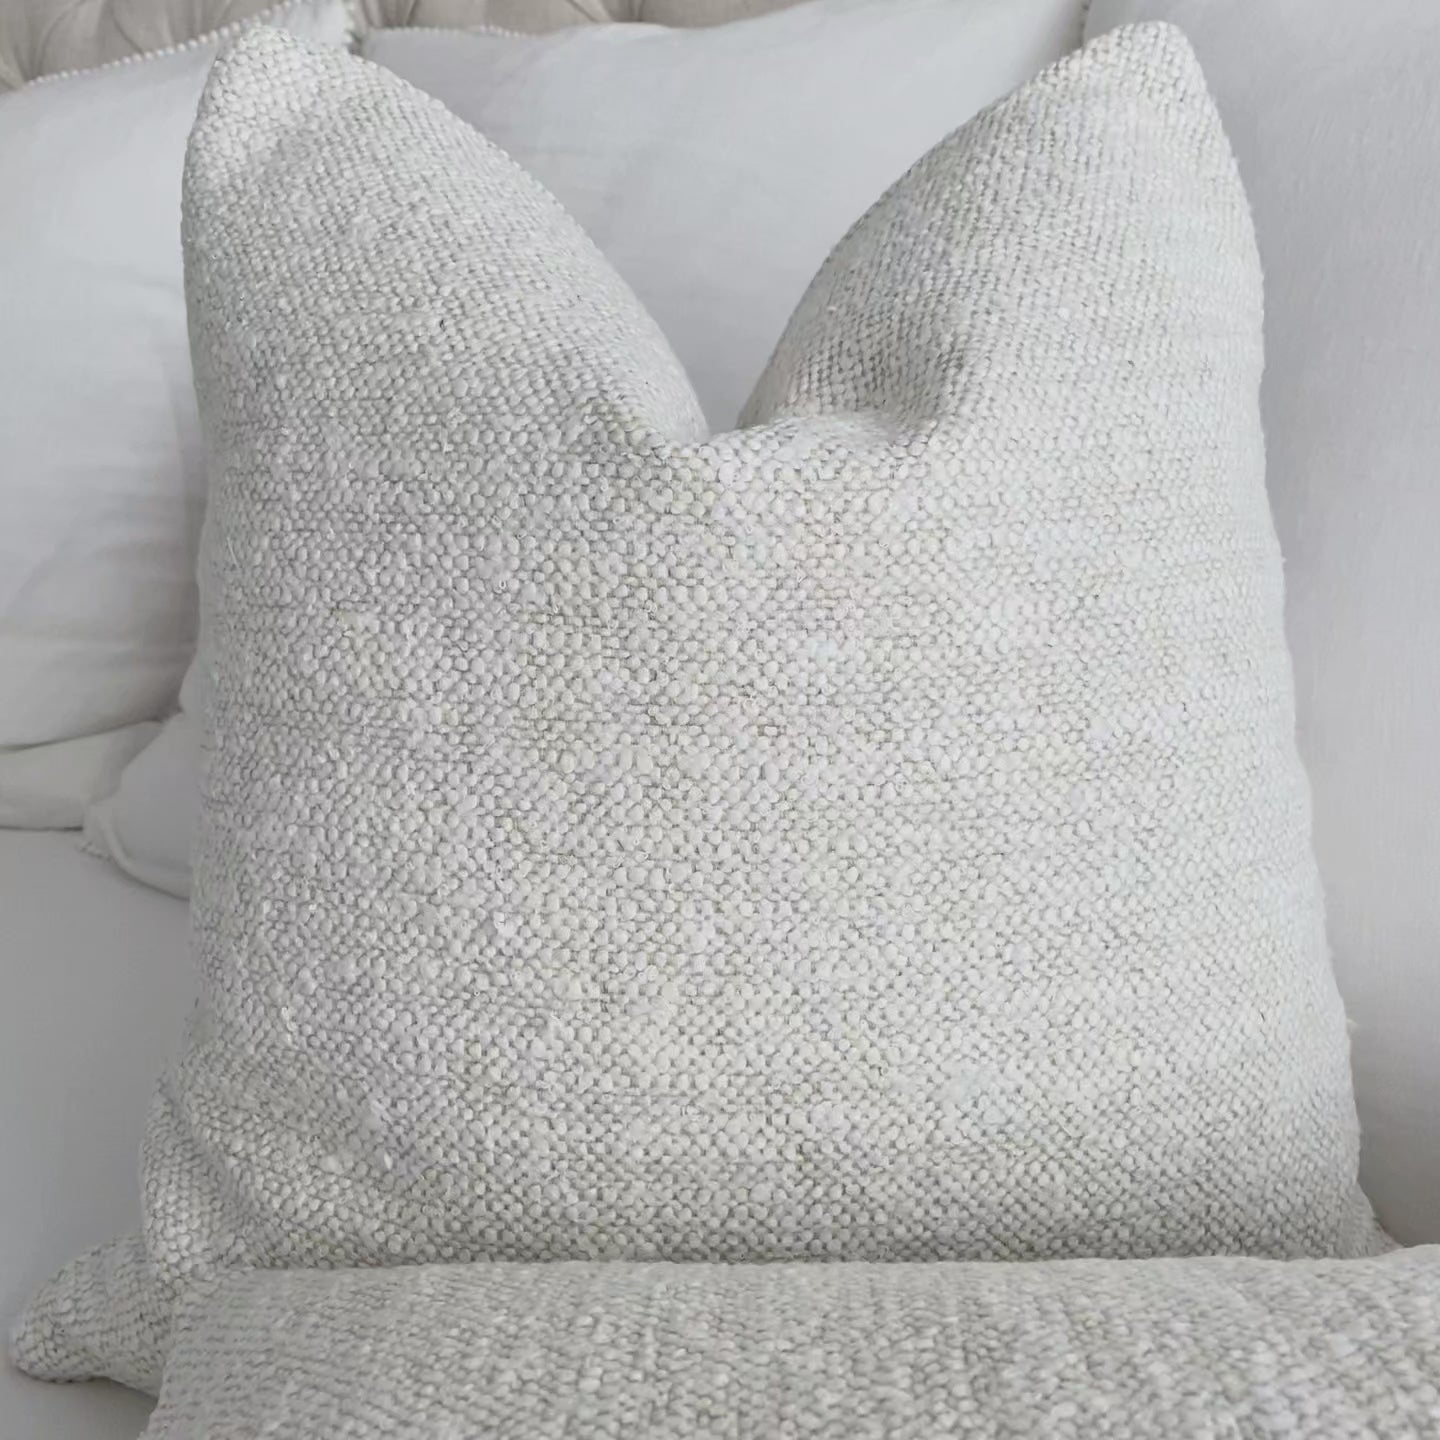 Thibaut Sasso Parchment Textured Soft Decorative Throw Pillow Cover Product Video